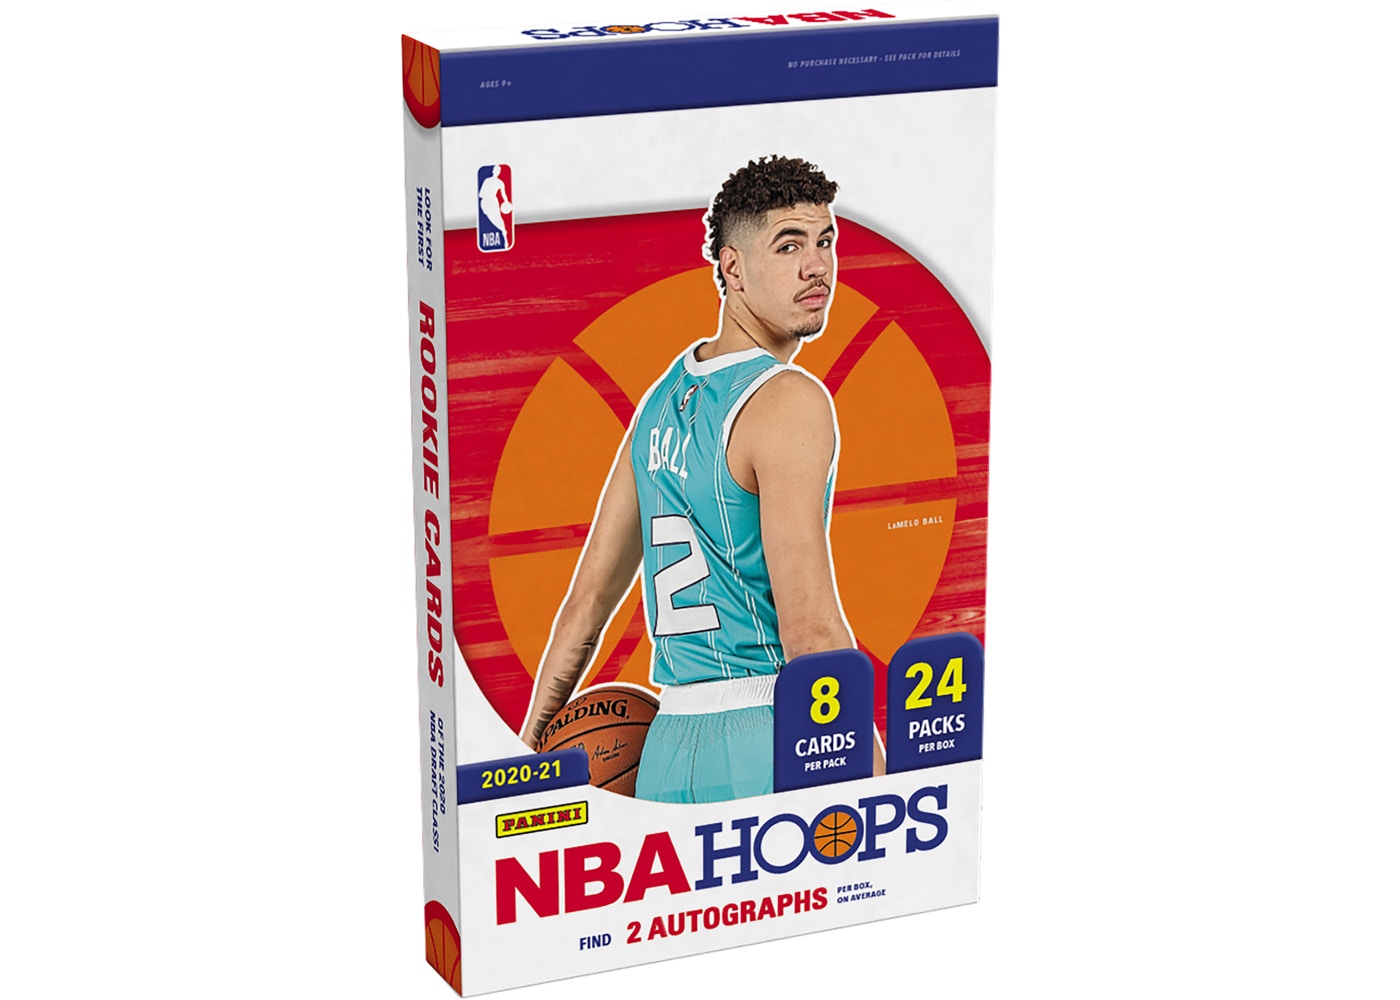 2020/21 Panini NBA Hoops Basketball Hobby Box - Owls Collectibles - Trusted American Sports Cards & Toy Supplier Located In Delray Beach, Florida